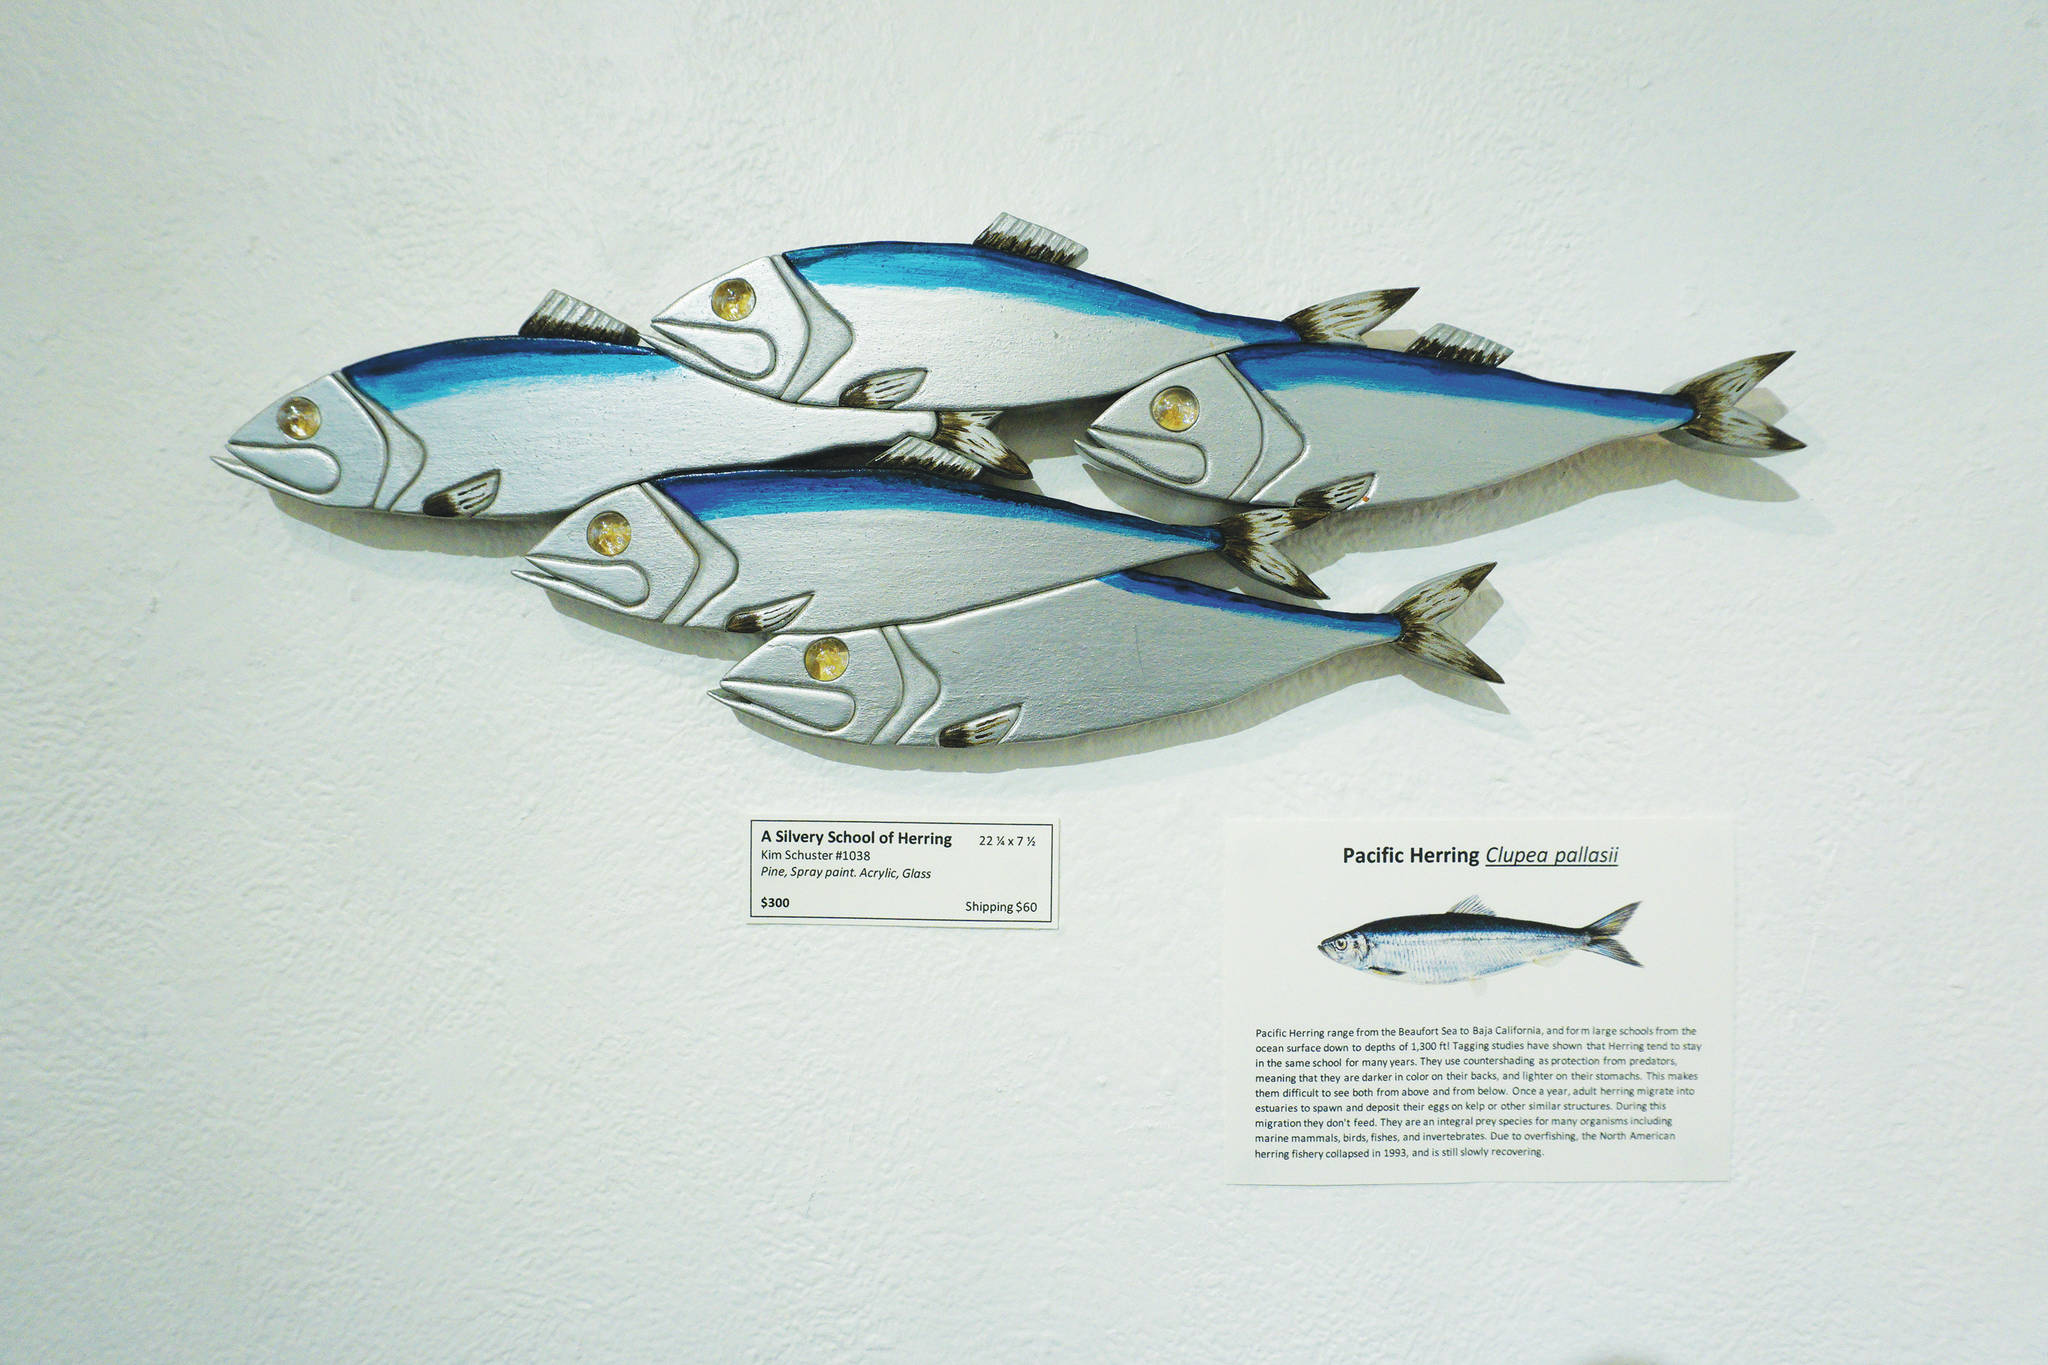 “A Silvery School of Herring” is one of the pieces in Kim Schuster’s exhibit, “Science Observed Through Art: Unsung Species,” as seen here on Friday, Dec. 4, 2020, at Ptarmigan Arts in Homer, Alaska. (Photo by Michael Armstrong/Homer News)